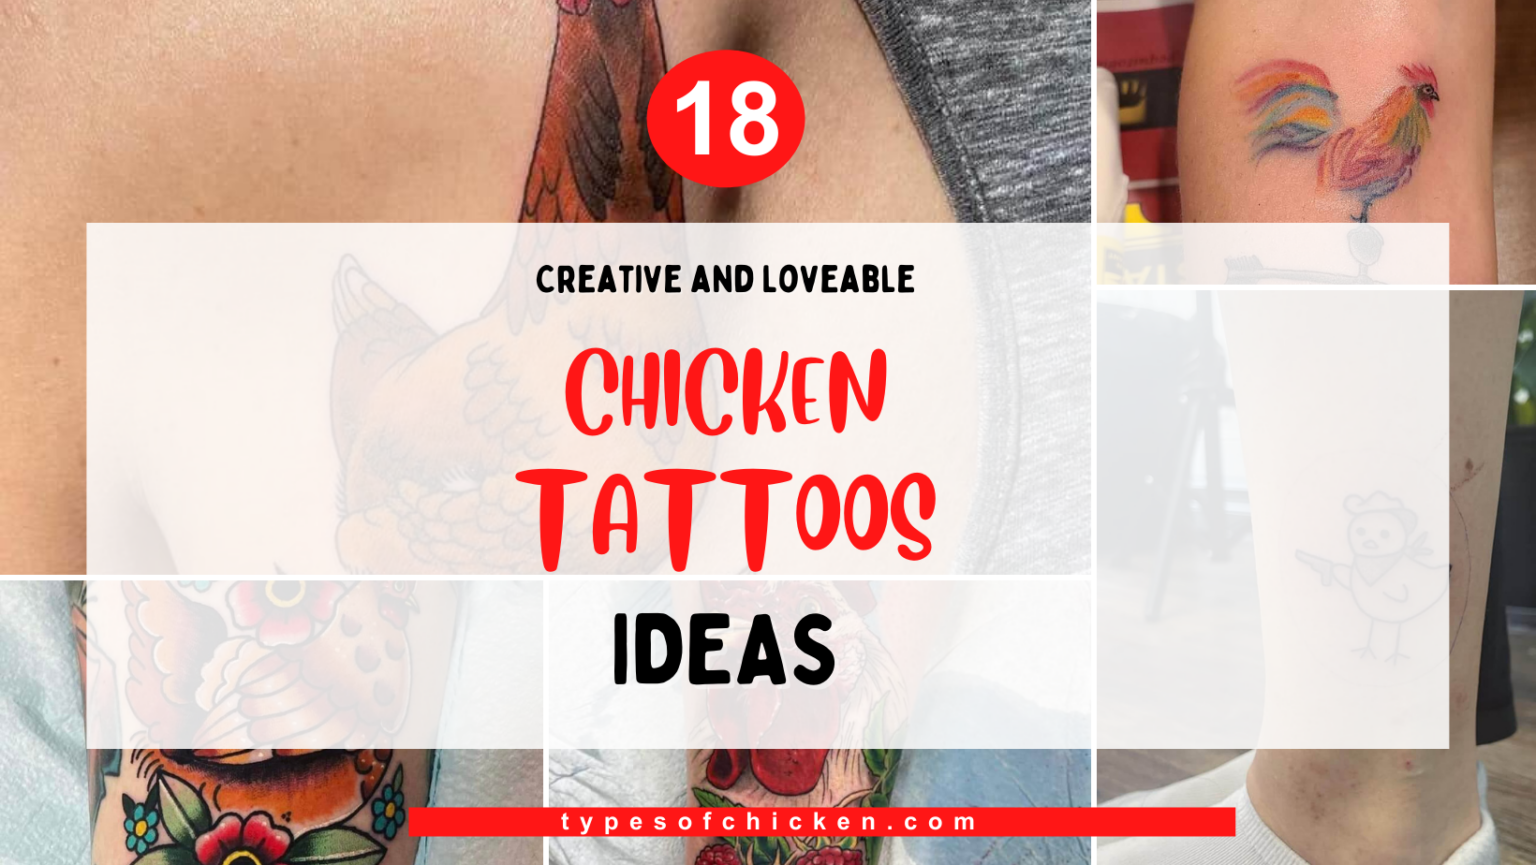 18 Creative and Loveable Chicken Tattoo Ideas That You Don't Wanna Miss